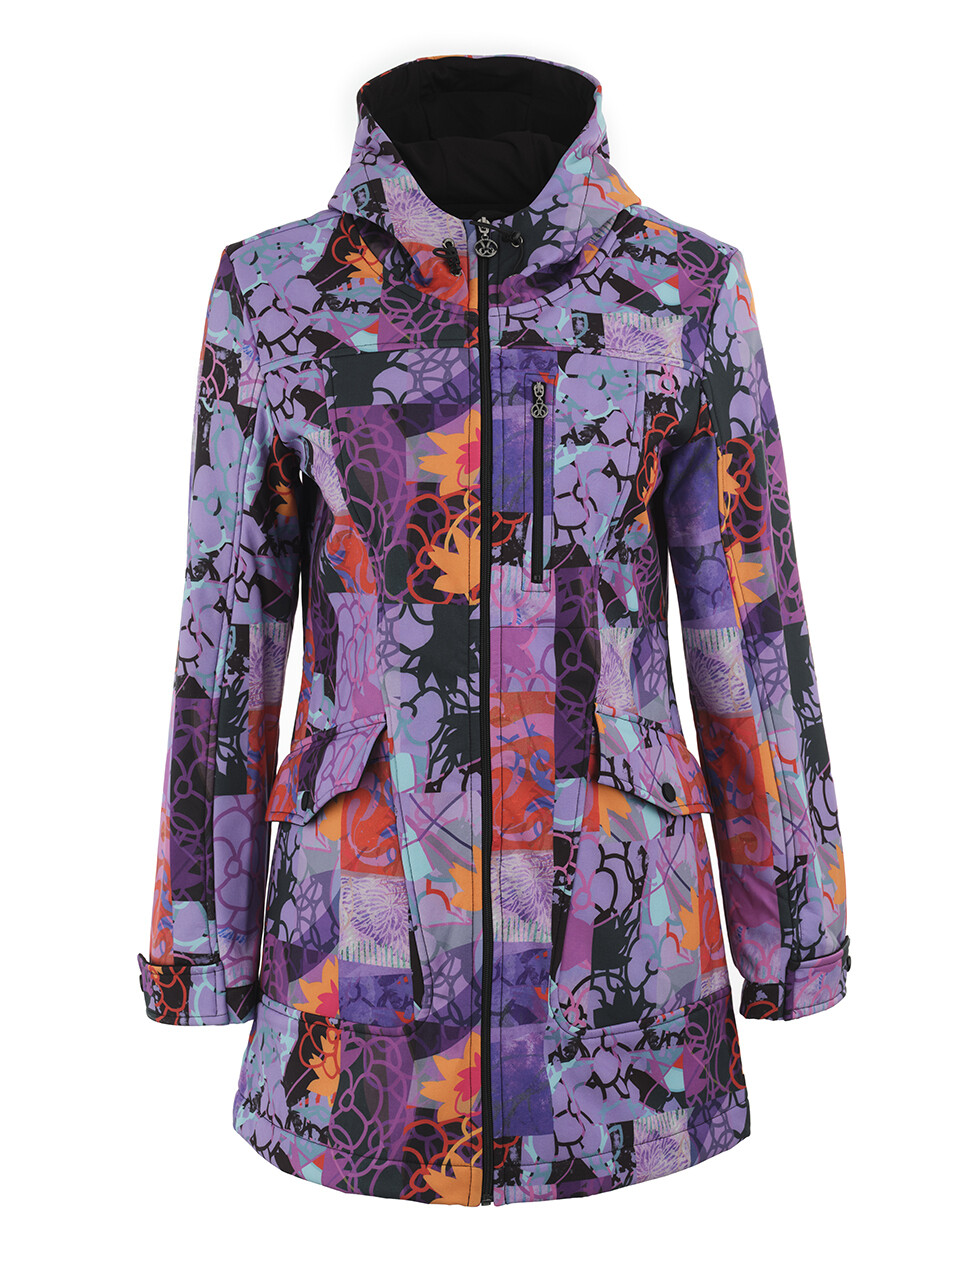 Simply Art Dolcezza: Digital Geometry Hooded Soft Shell Abstract Art Coat SOLD OUT